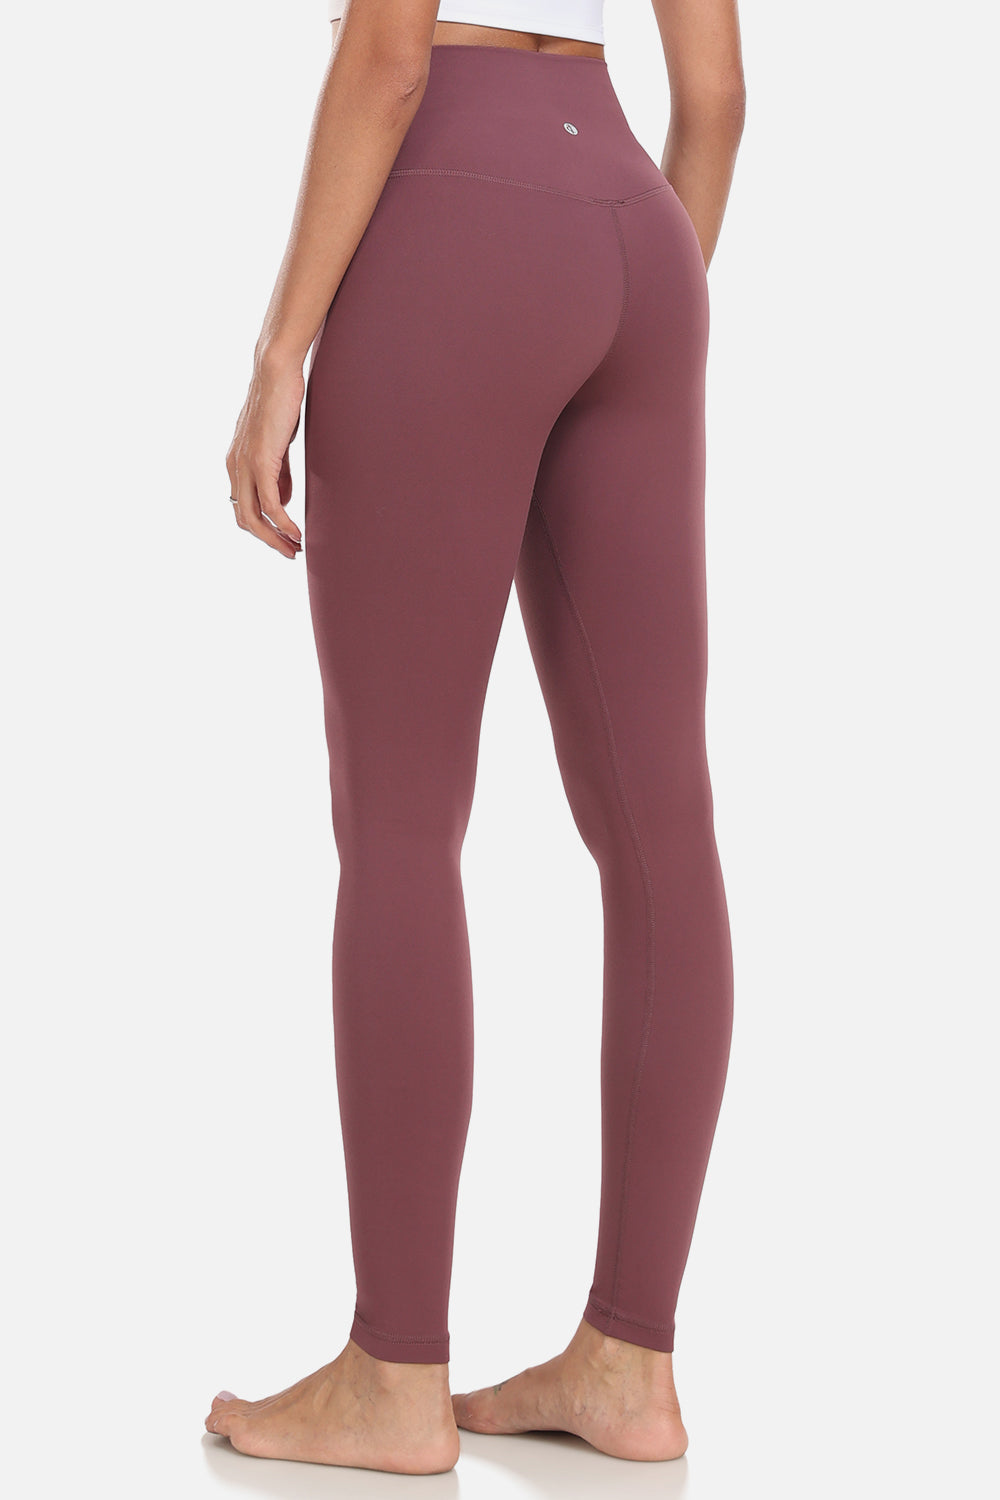 Dreamlux Flared Legging with Zippered Pockets 29.5 / 31.5 Inseam